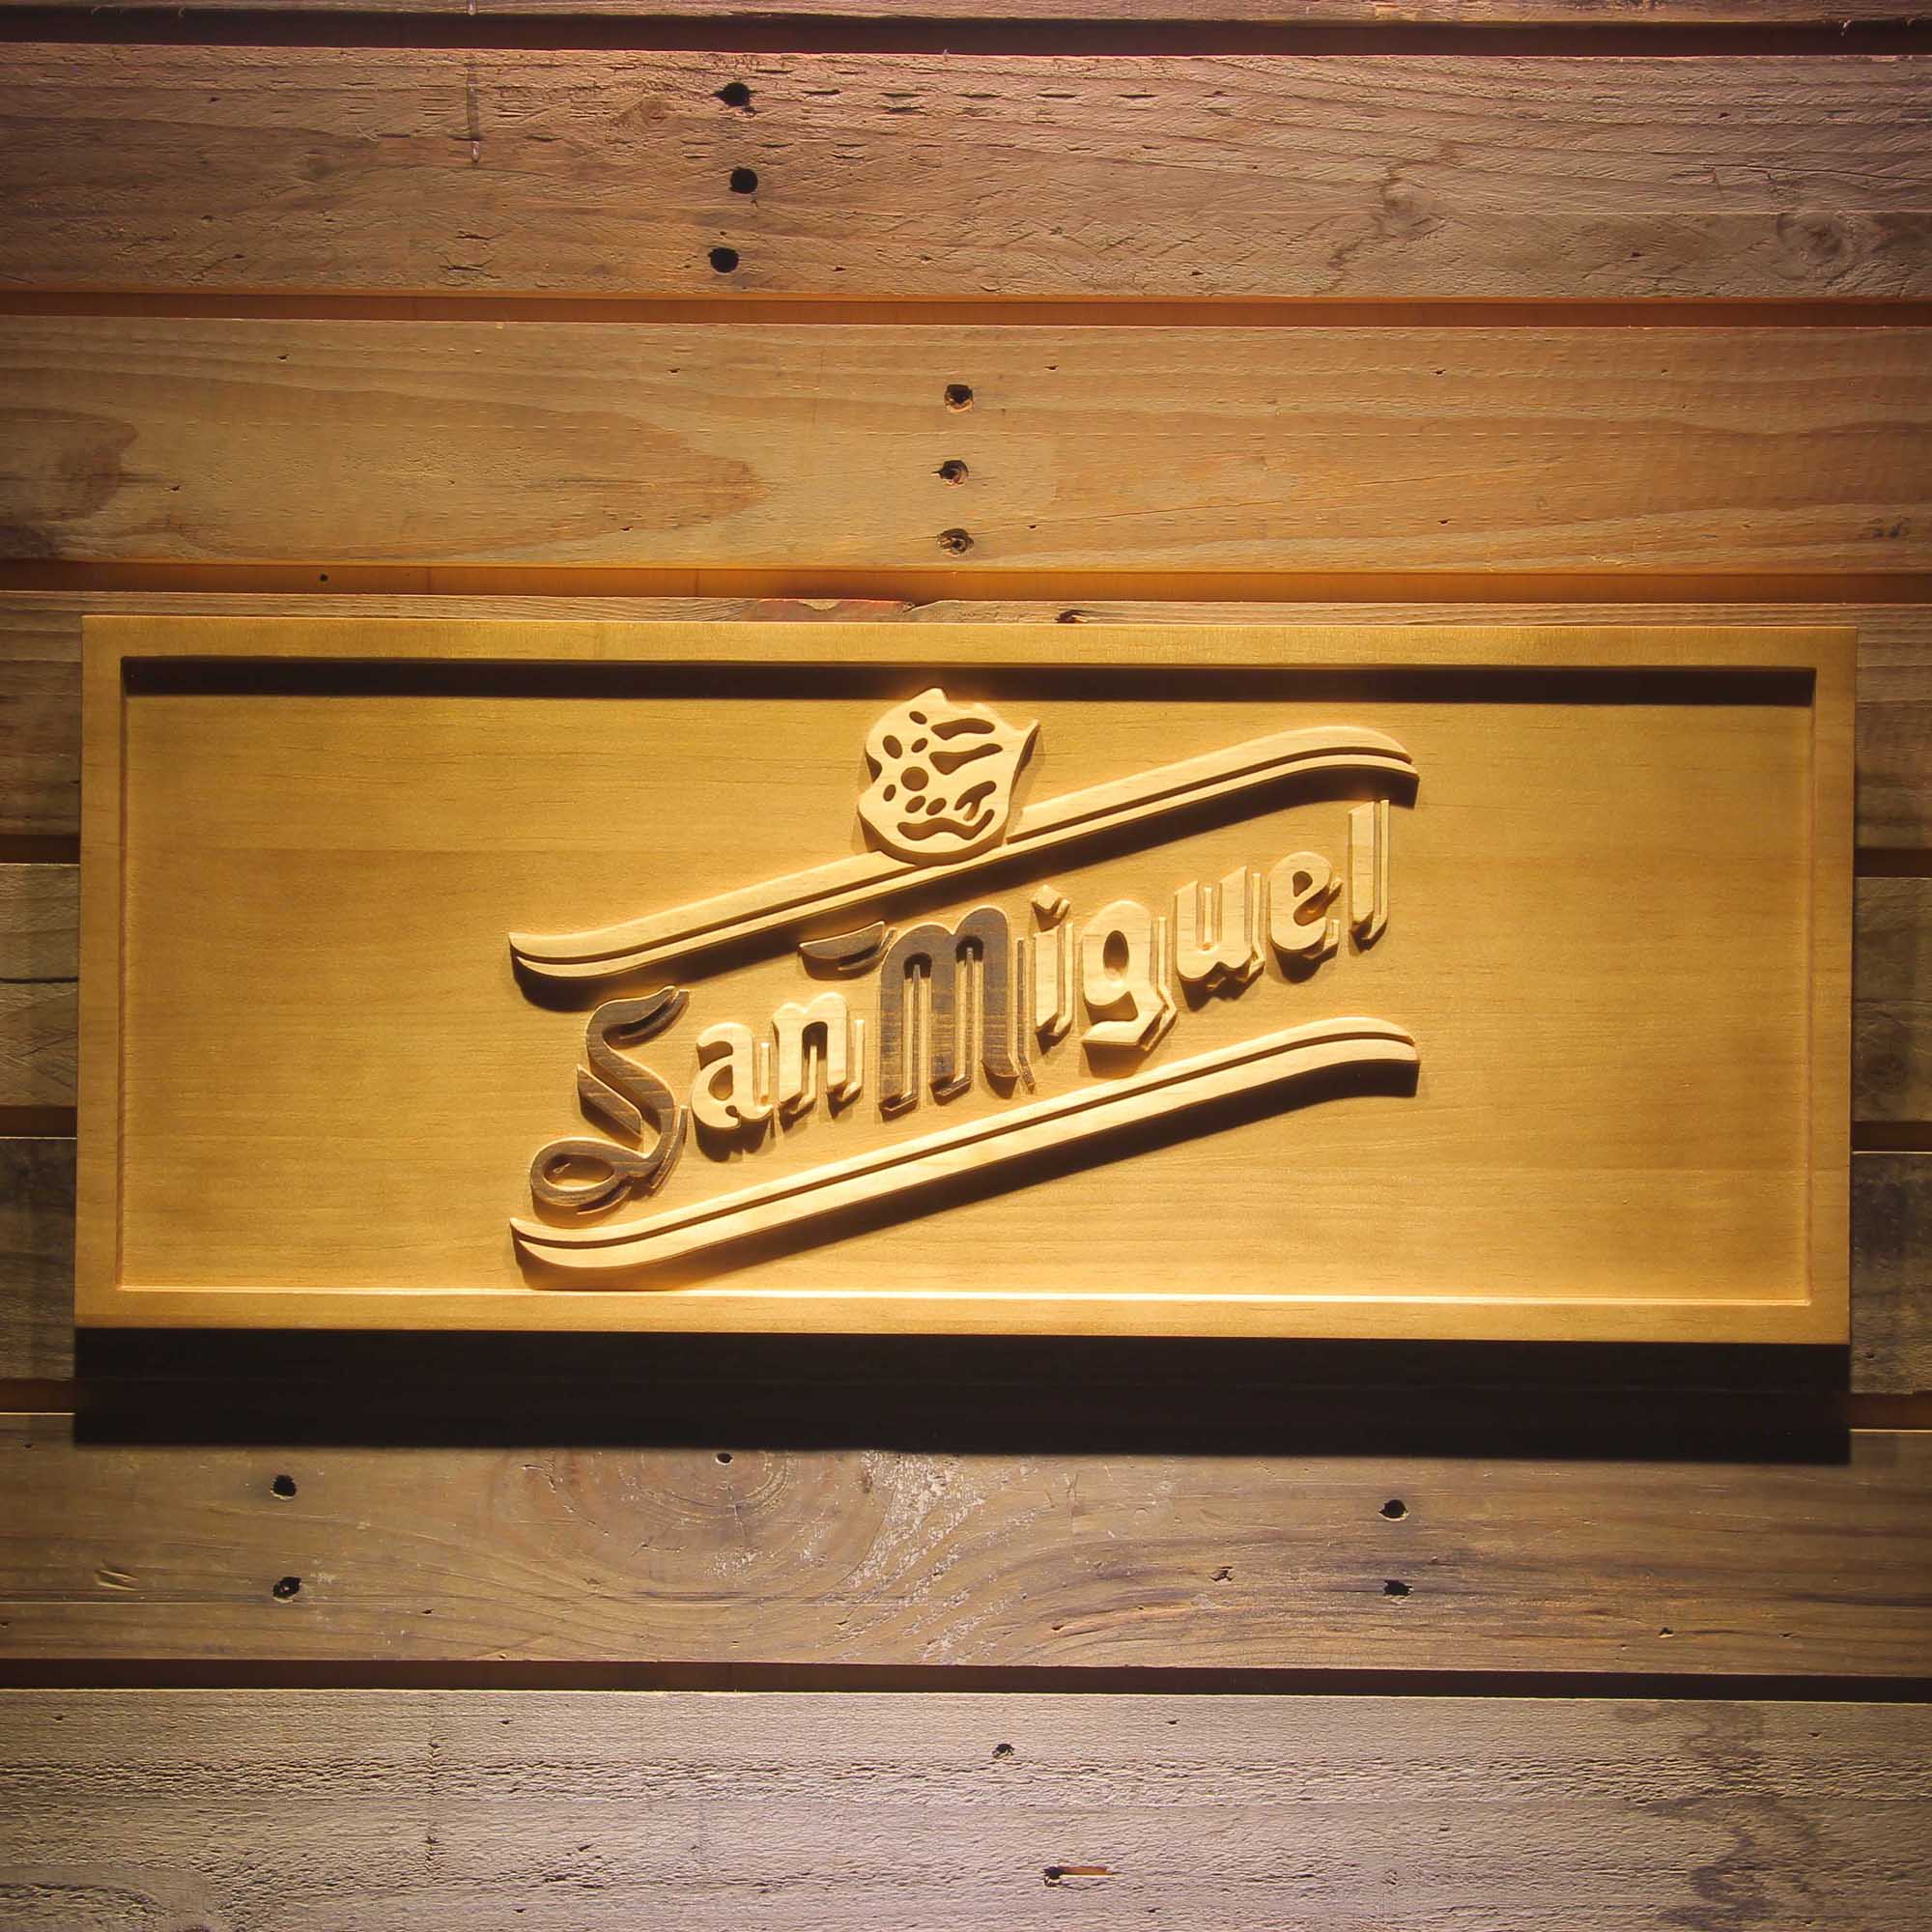 San Miguel 3D Solid Wooden Craving Sign